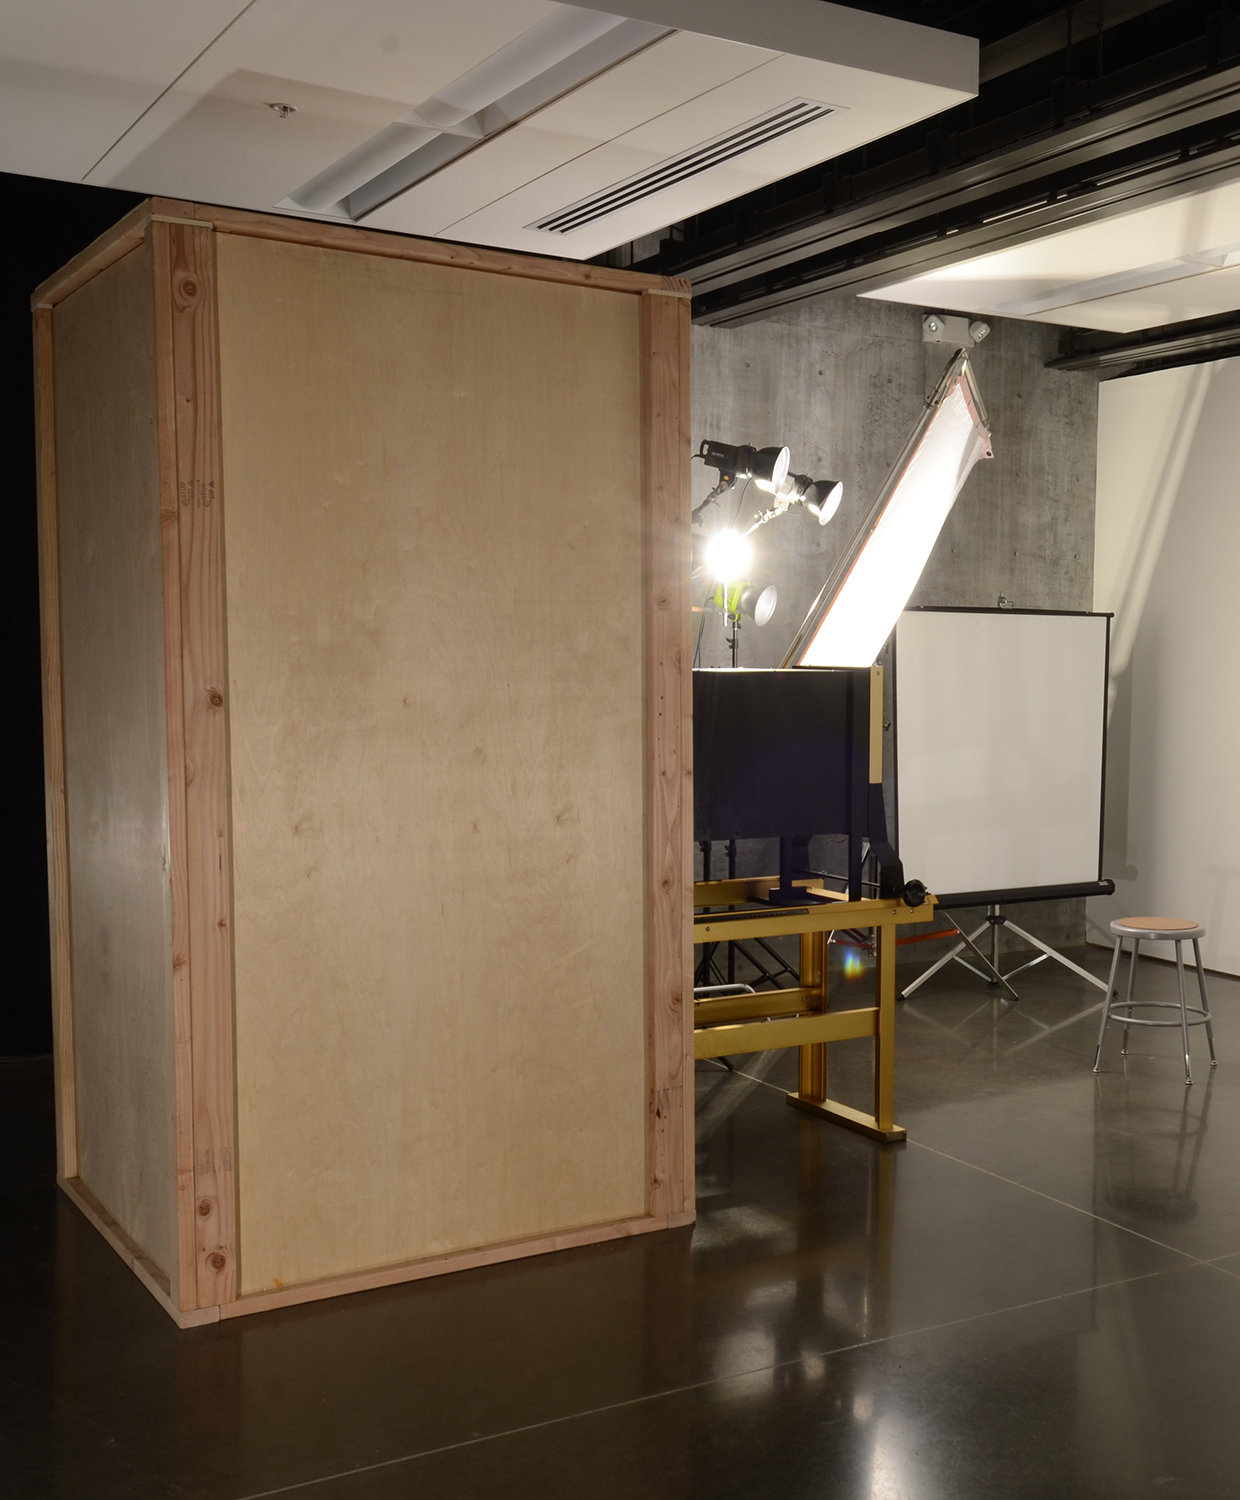 Ultra Large Format View Camera with Lighting Setup in the Gallery